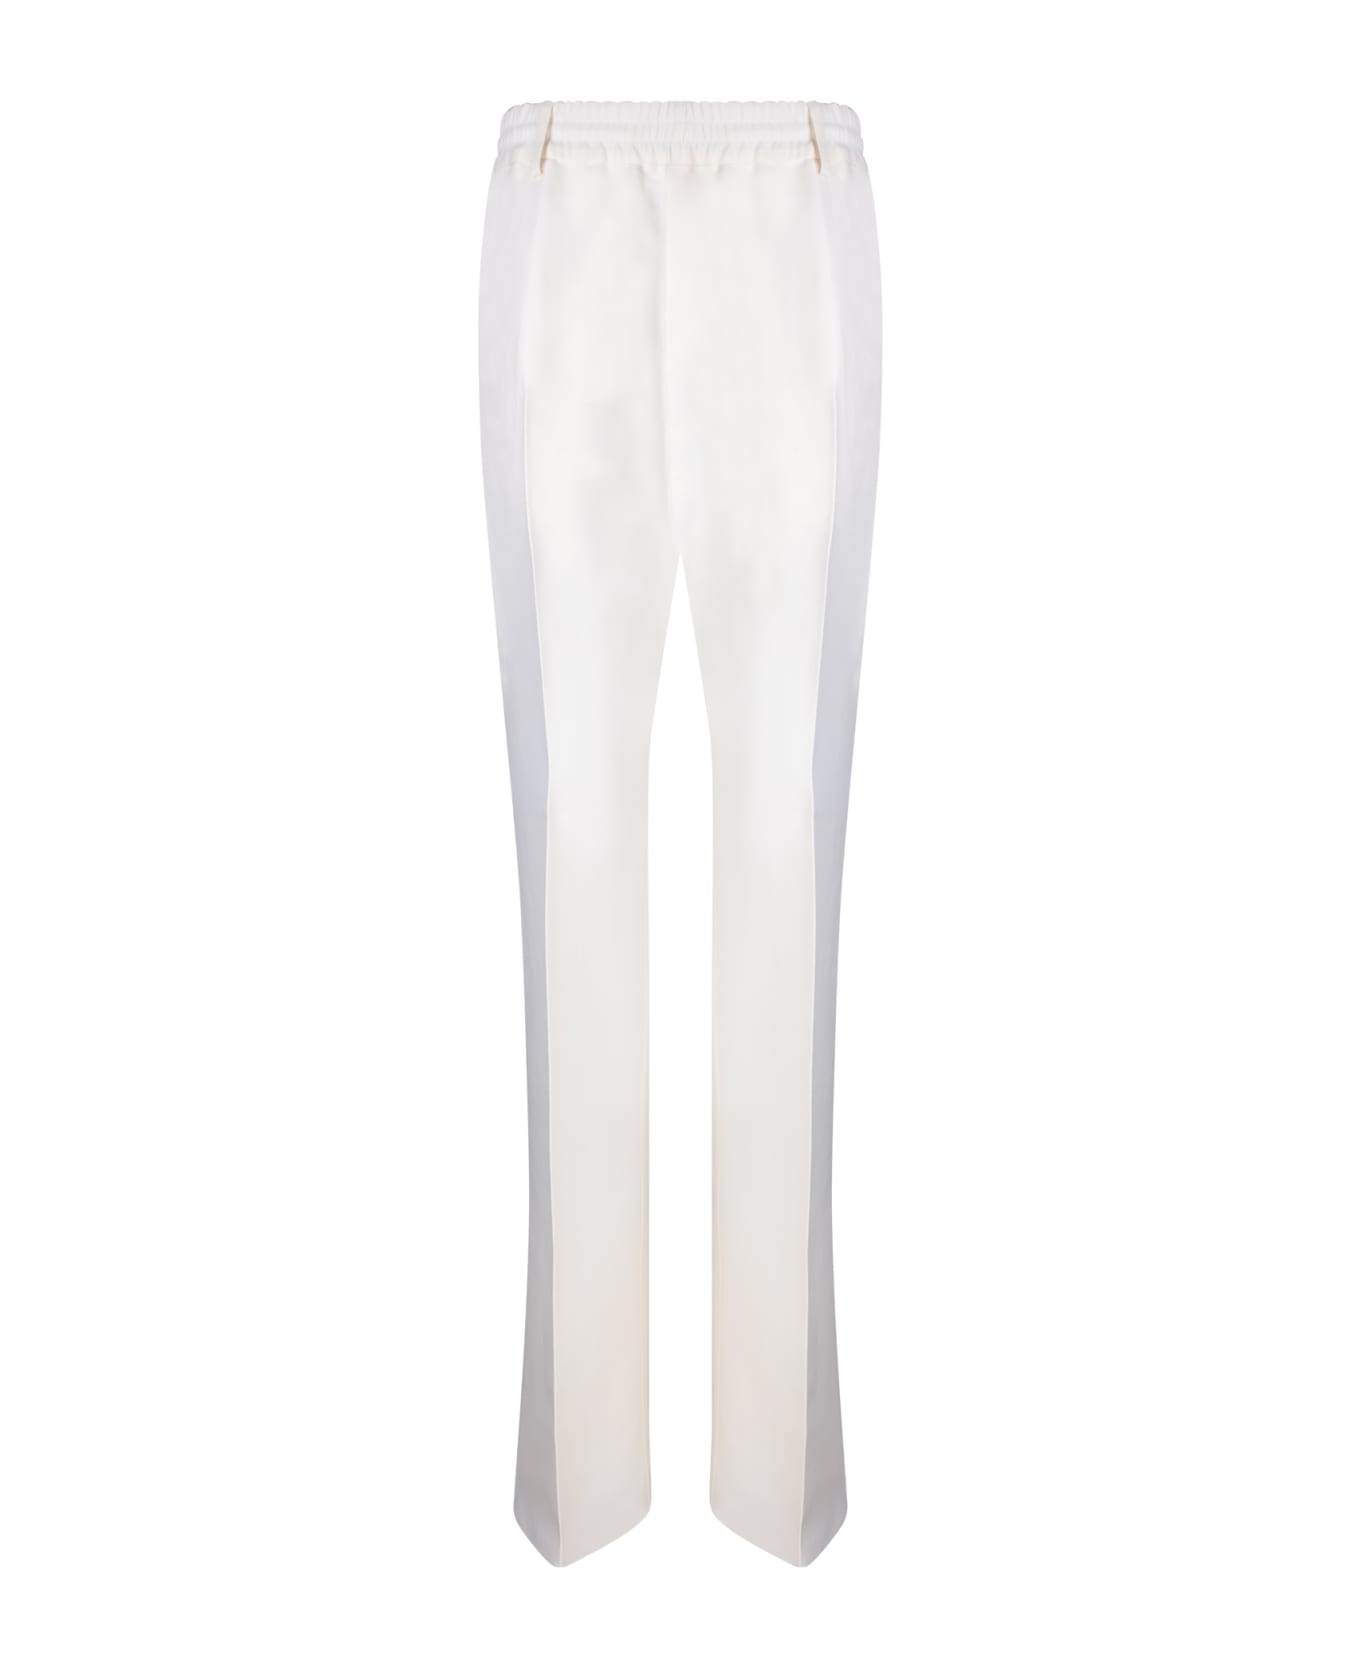 Burberry White Casual Trousers - White ボトムス